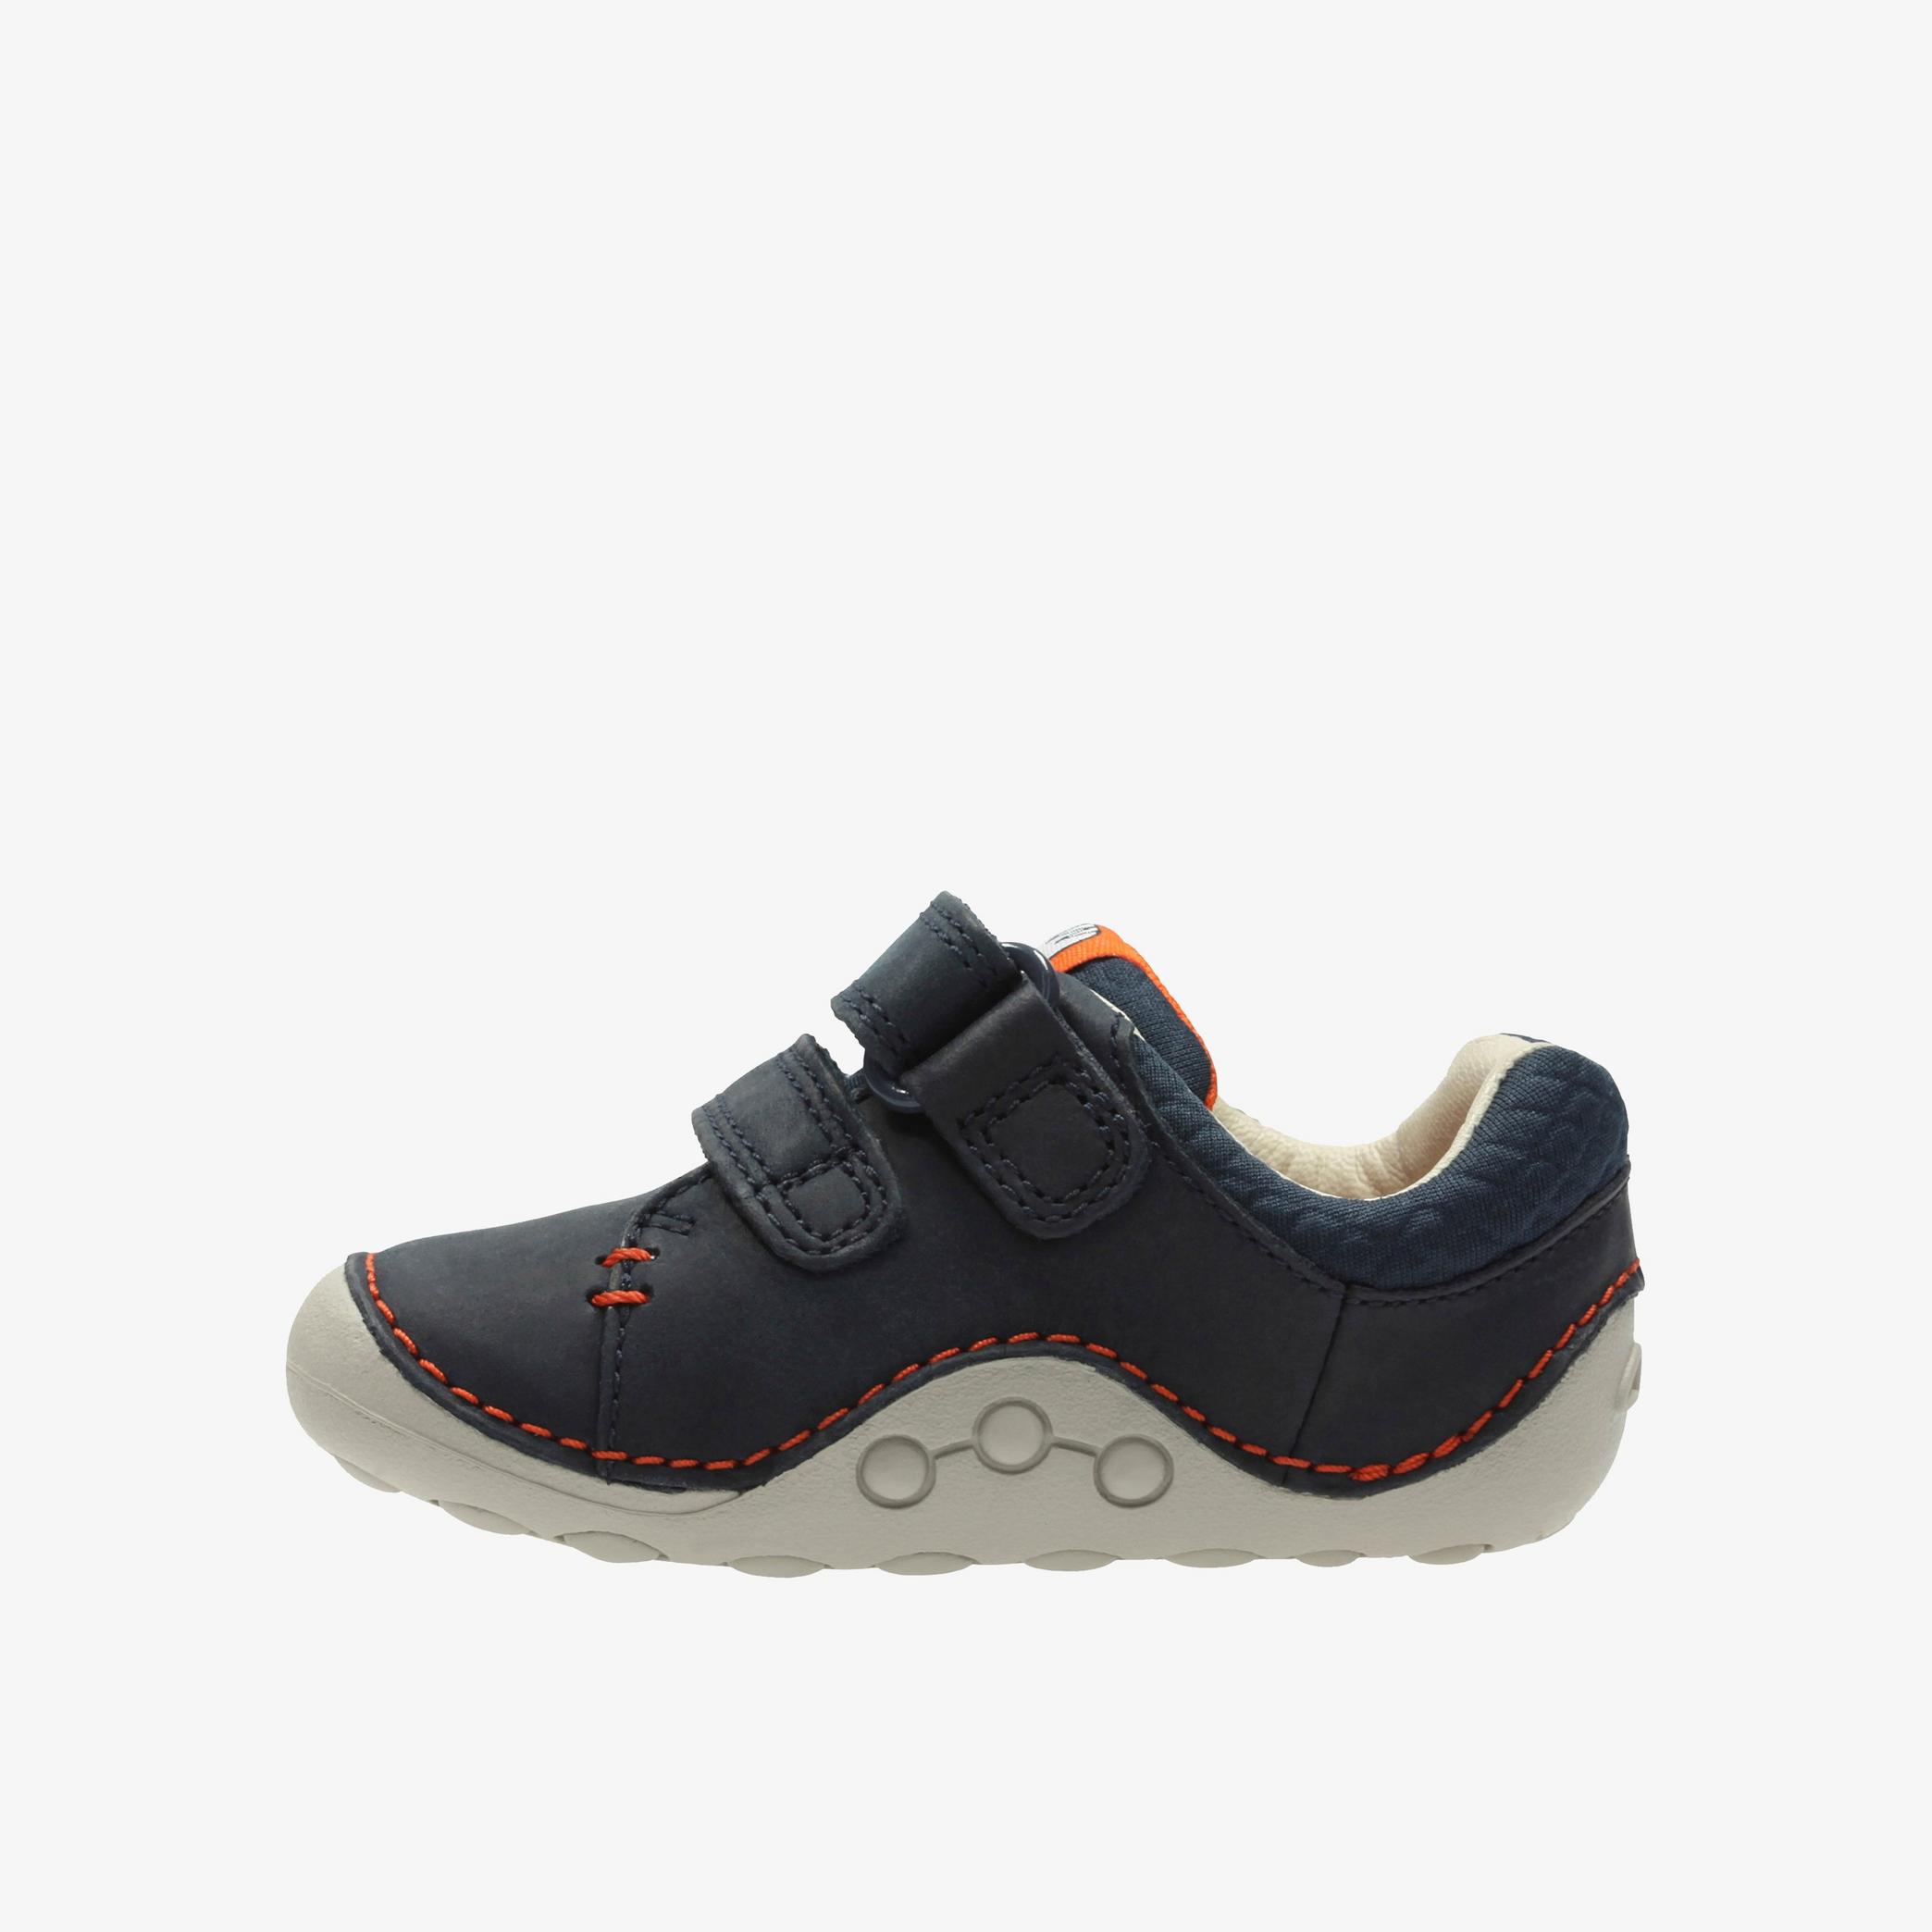 Tiny Trail Toddler Navy Leather Pre Walker, view 2 of 6